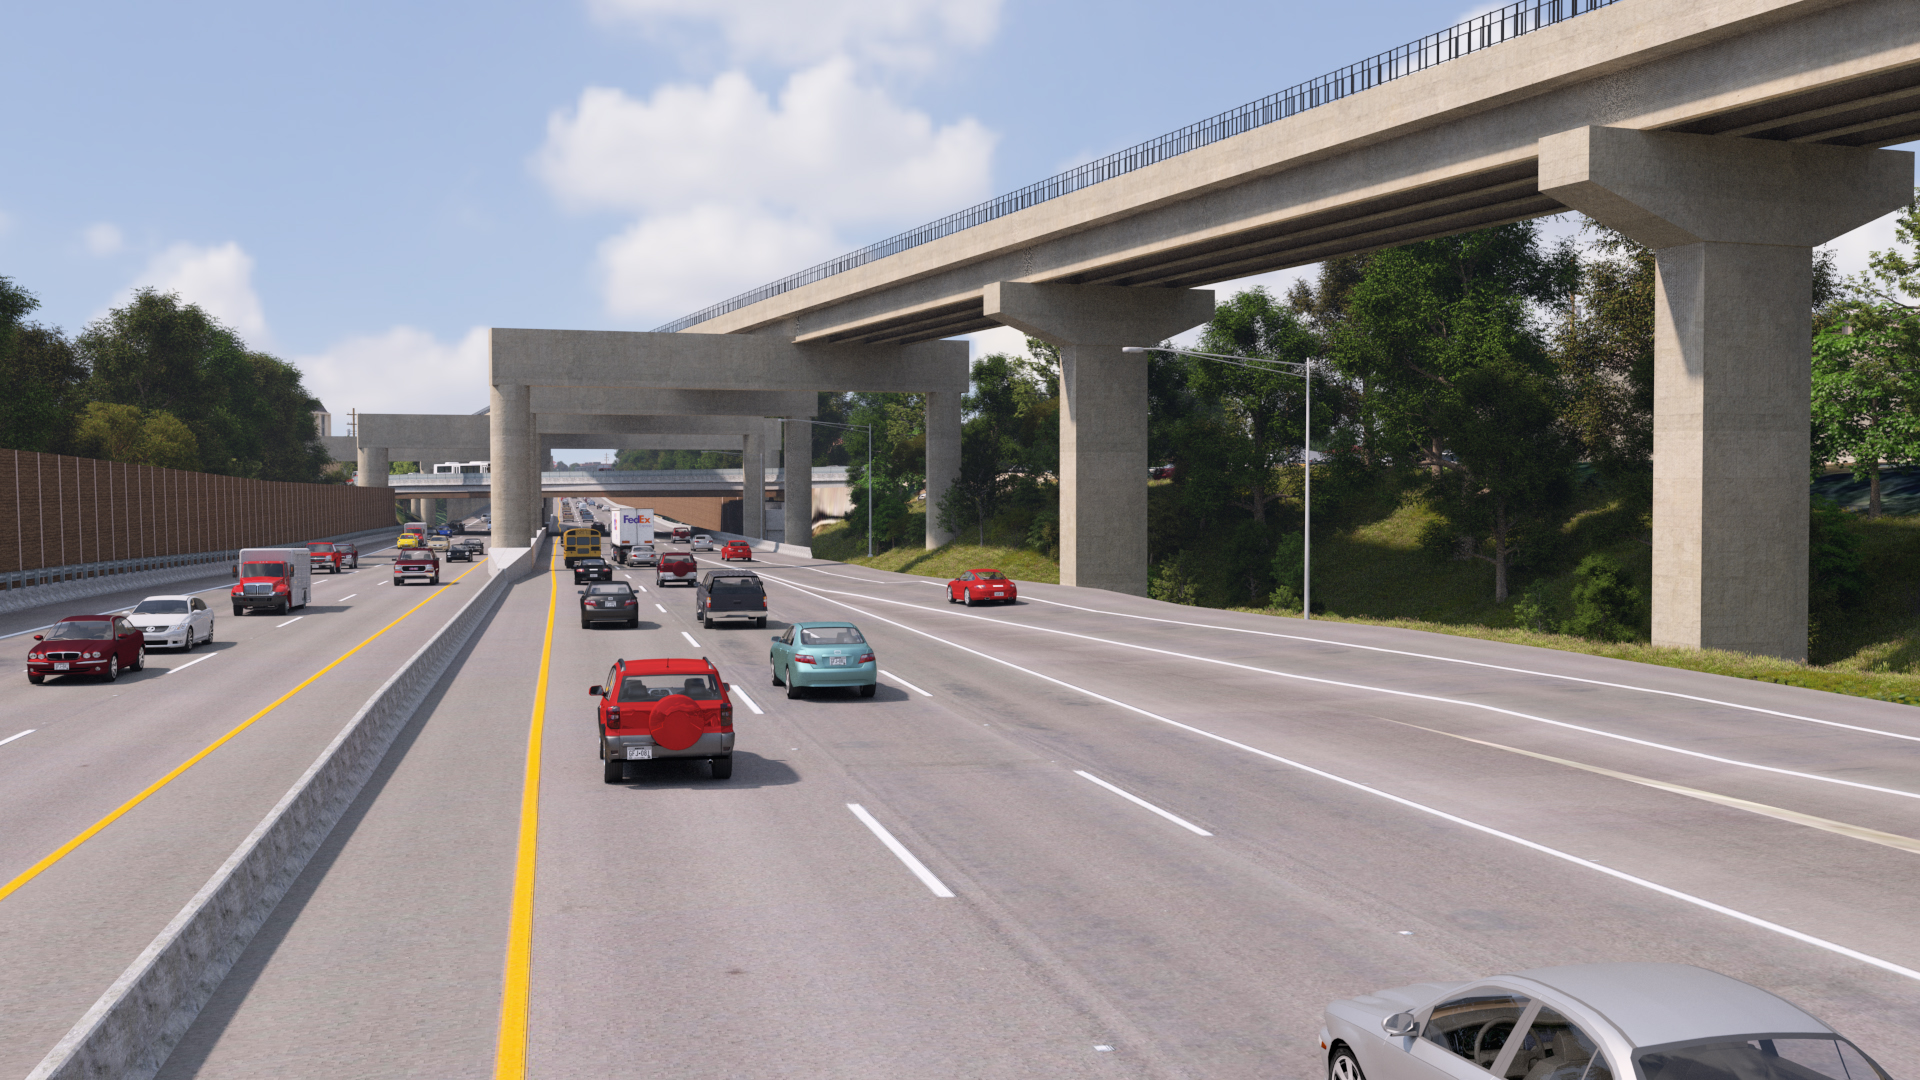 artistic rendering of a highway with cars and a raised rail line to the right